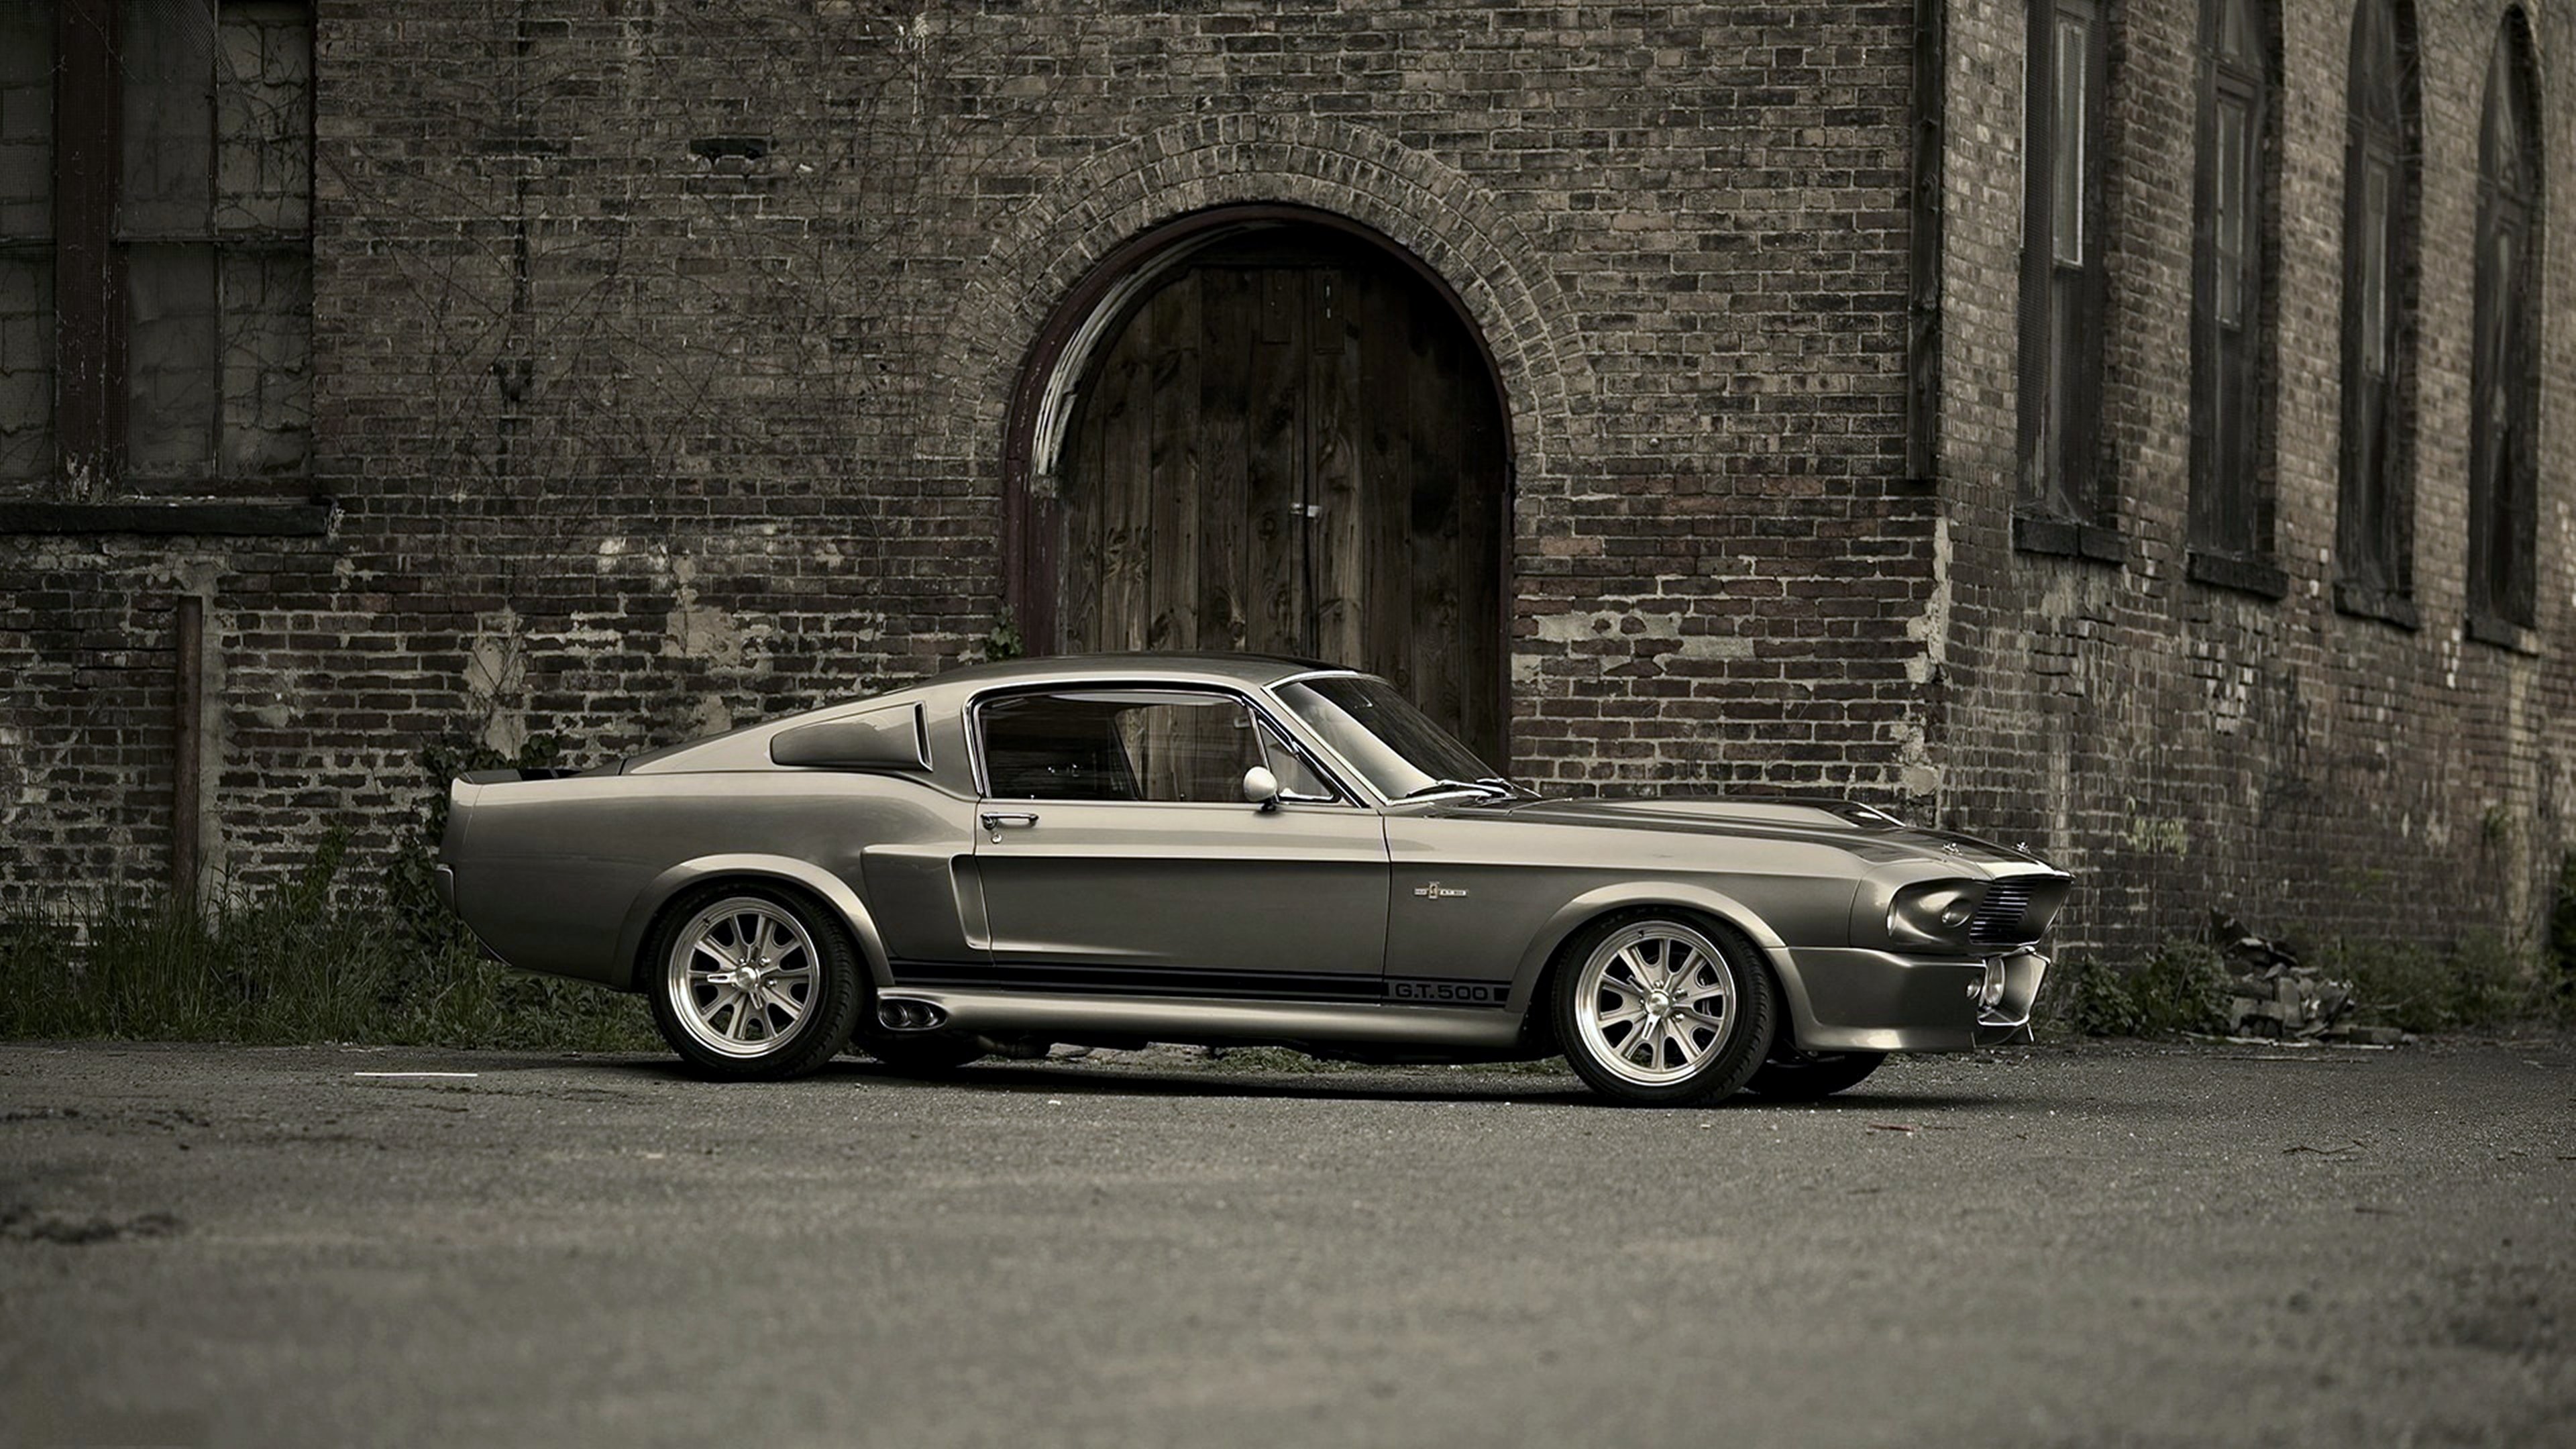 ford, Mustang, Shelby, Gt500, Eleanor, Gray, Wall, Build, Cars, Speed, Motors Wallpaper